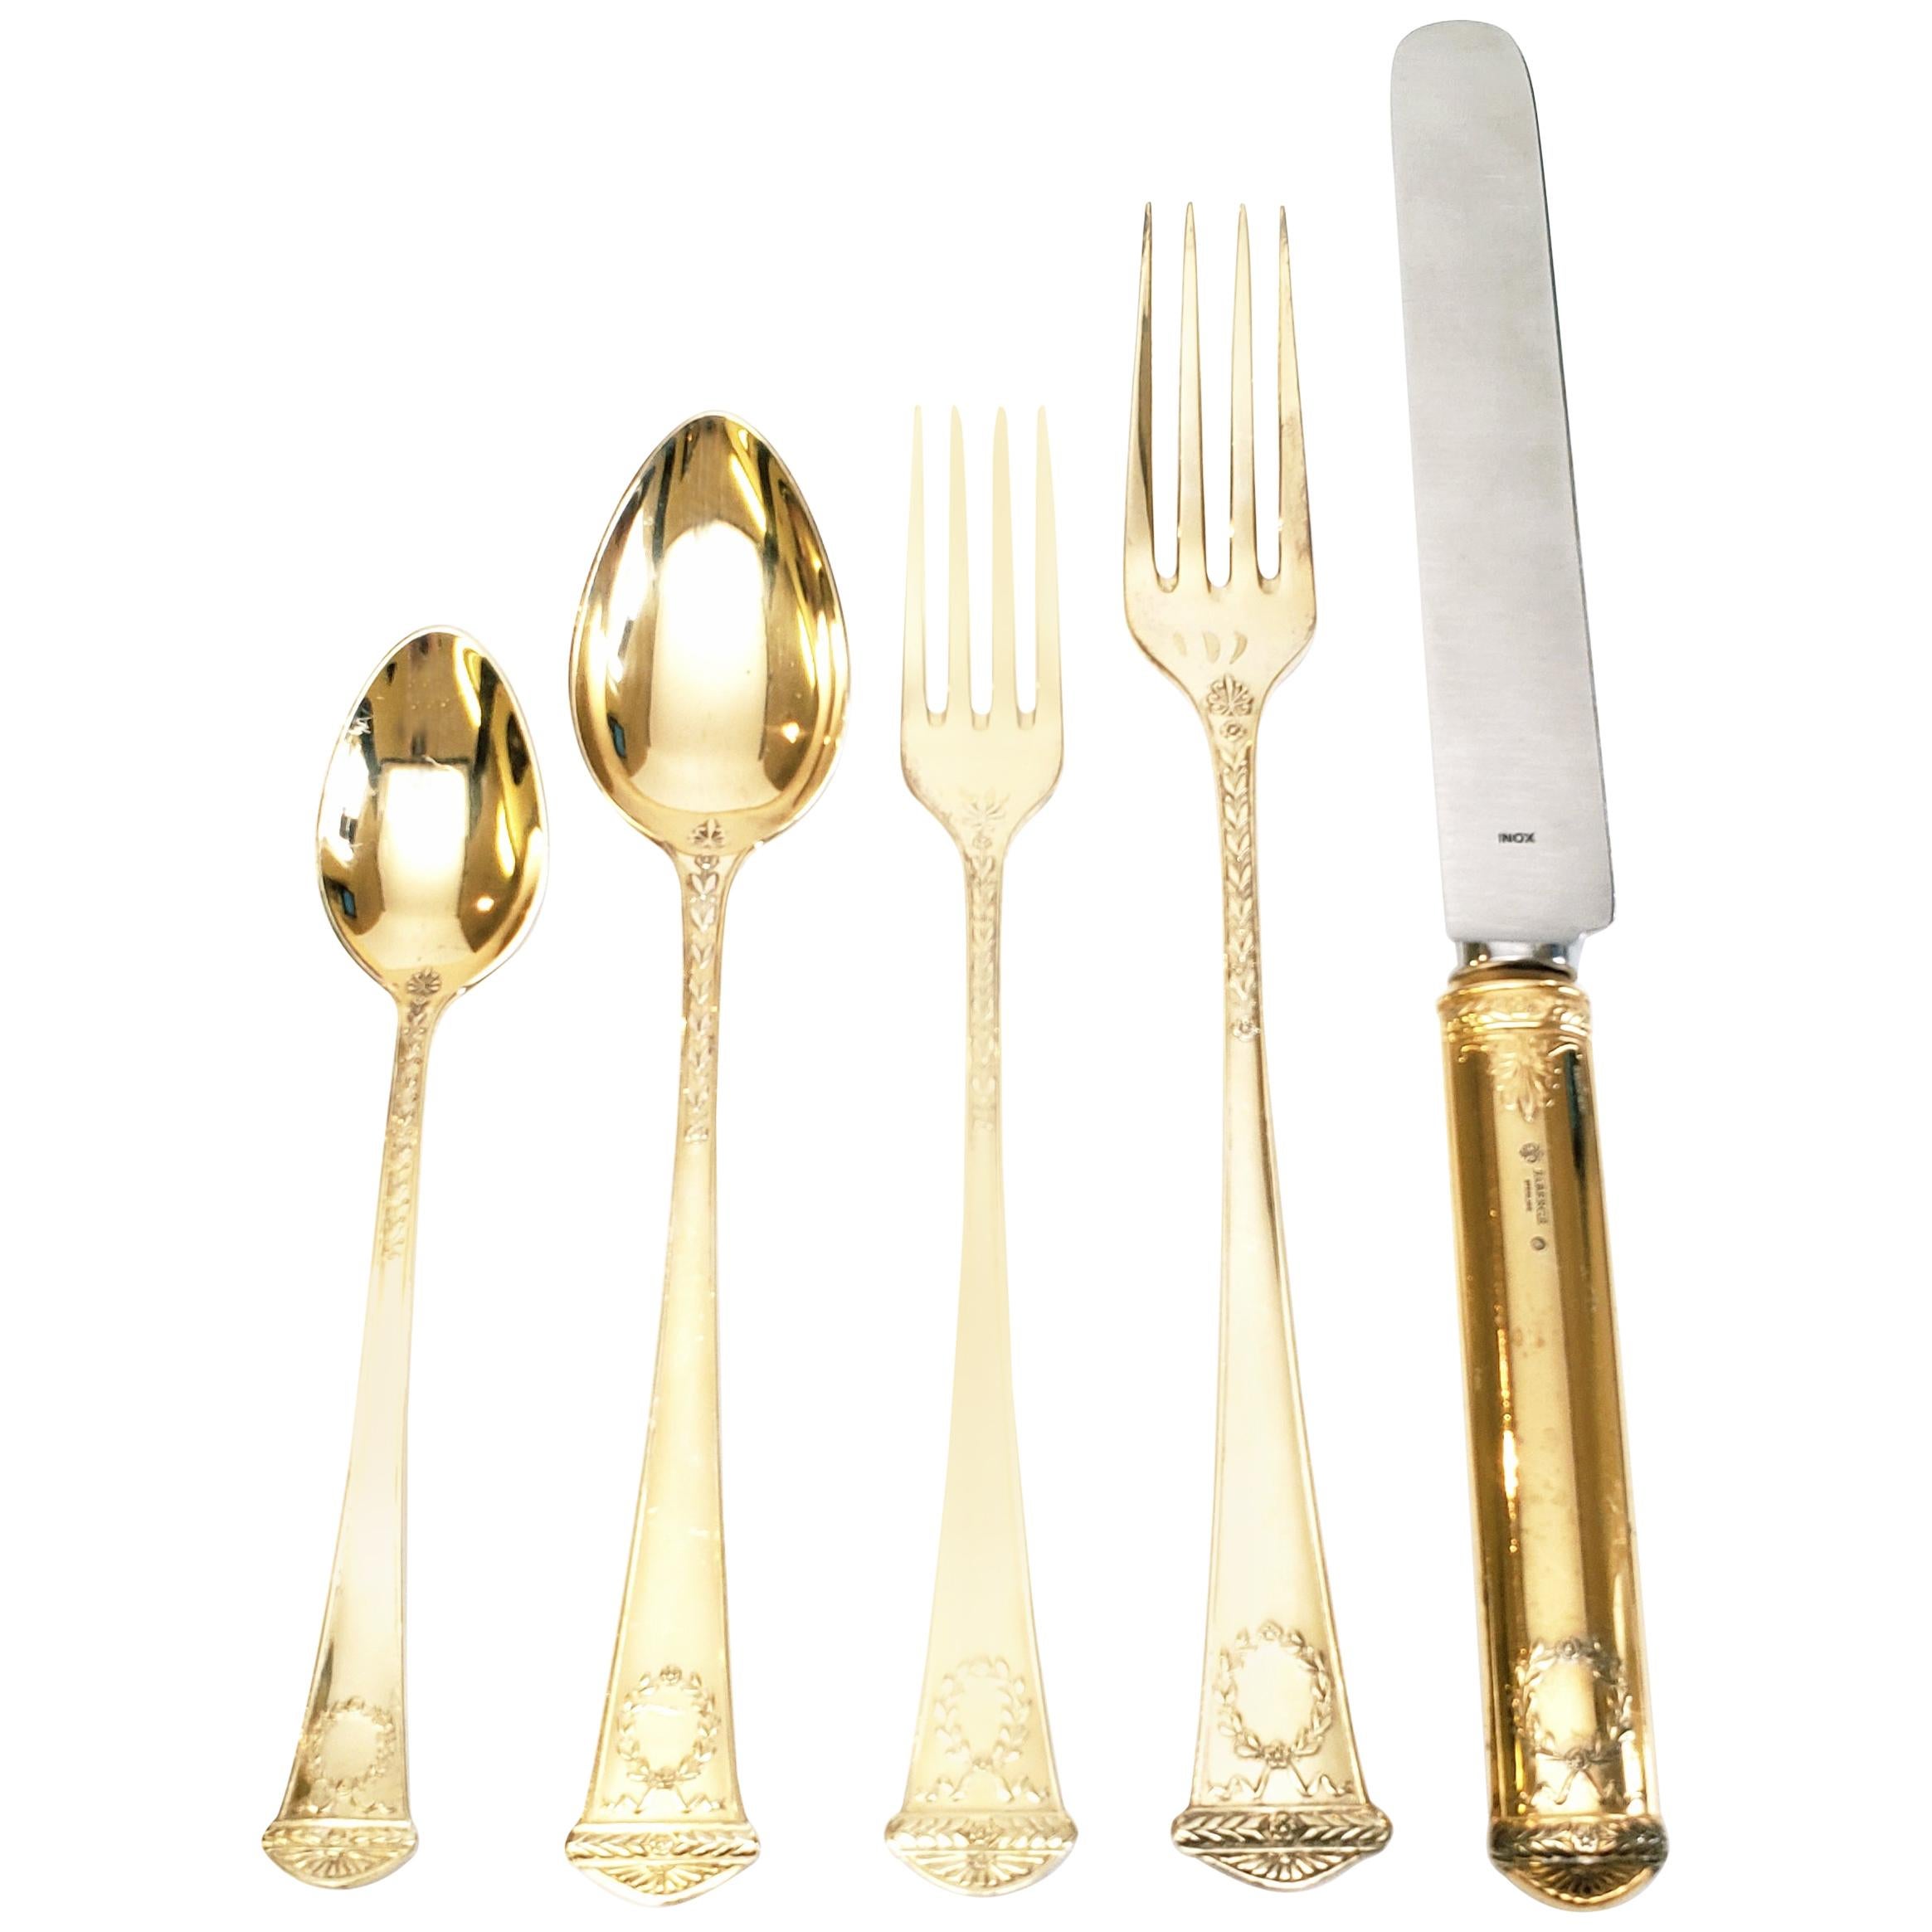 Faberge Imperial Court Gold Vermeil over Sterl Silver 5pc Place Setting